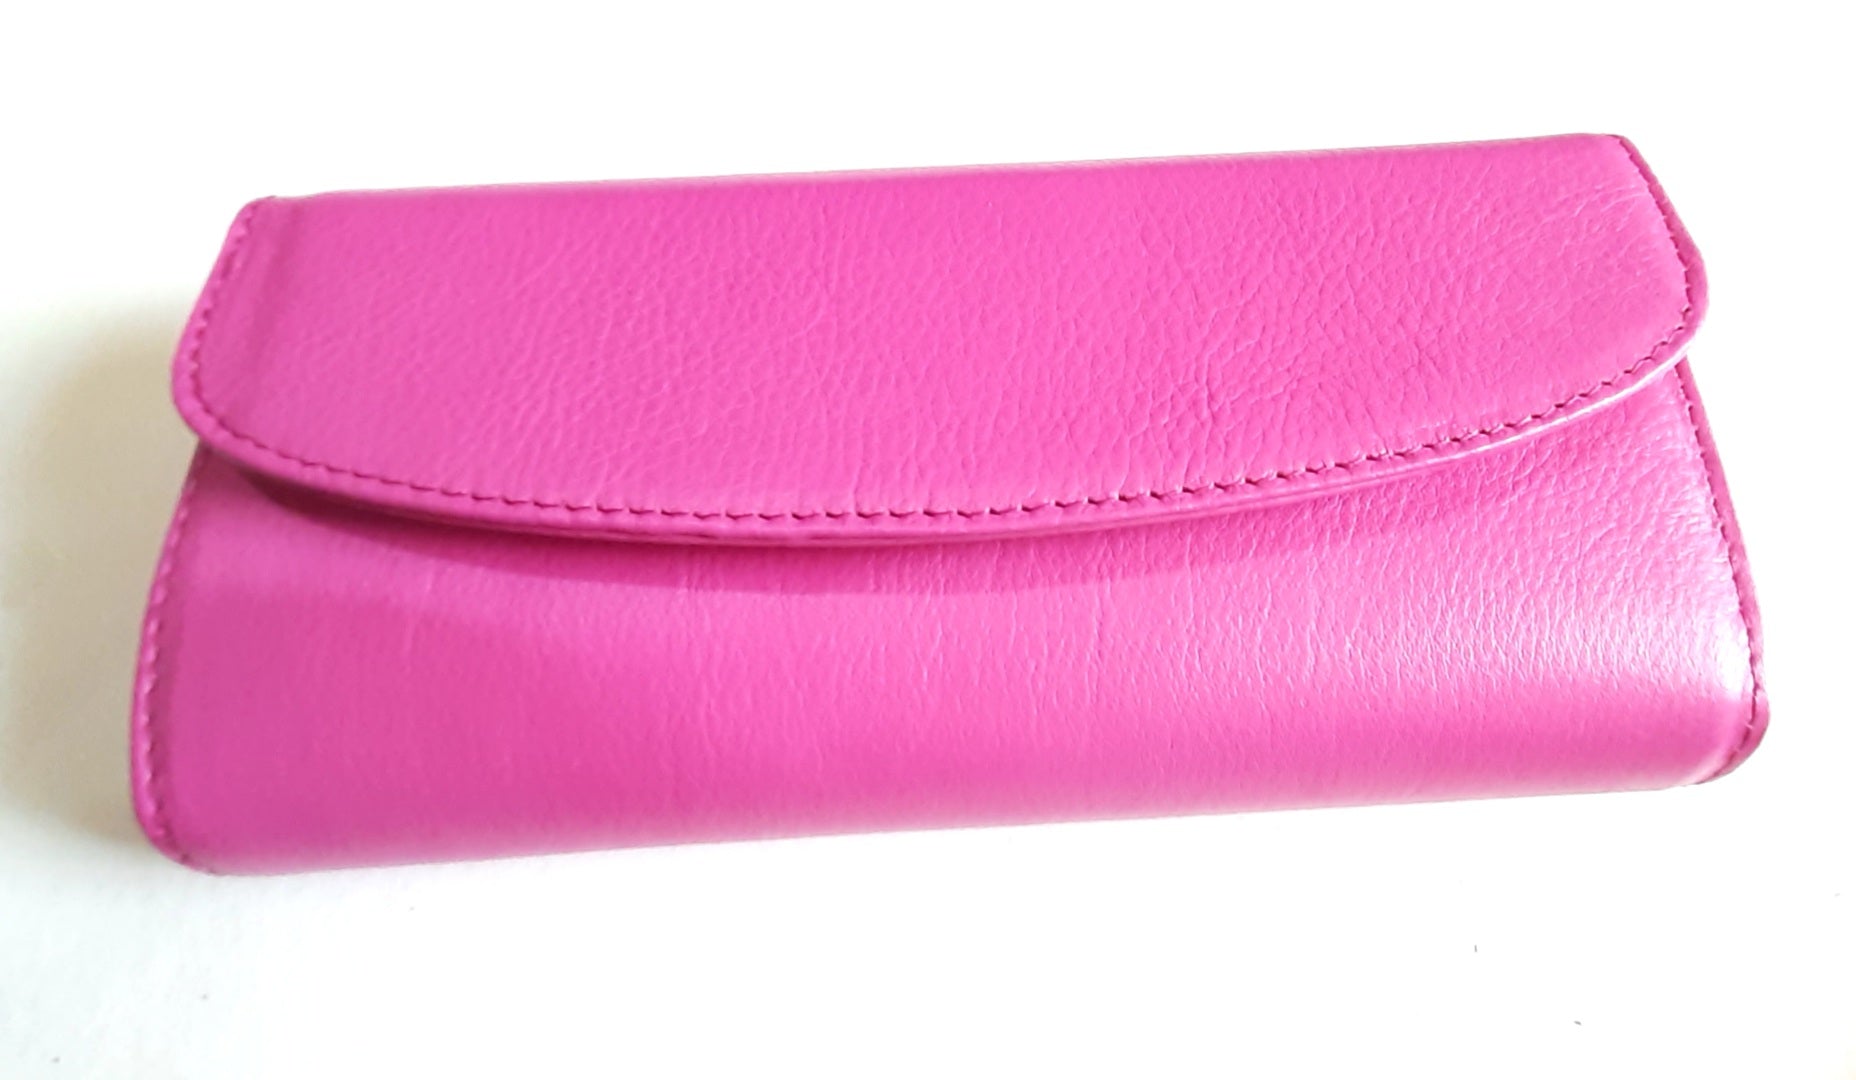 A pink genuine leather hand made ladies wallets/purse 